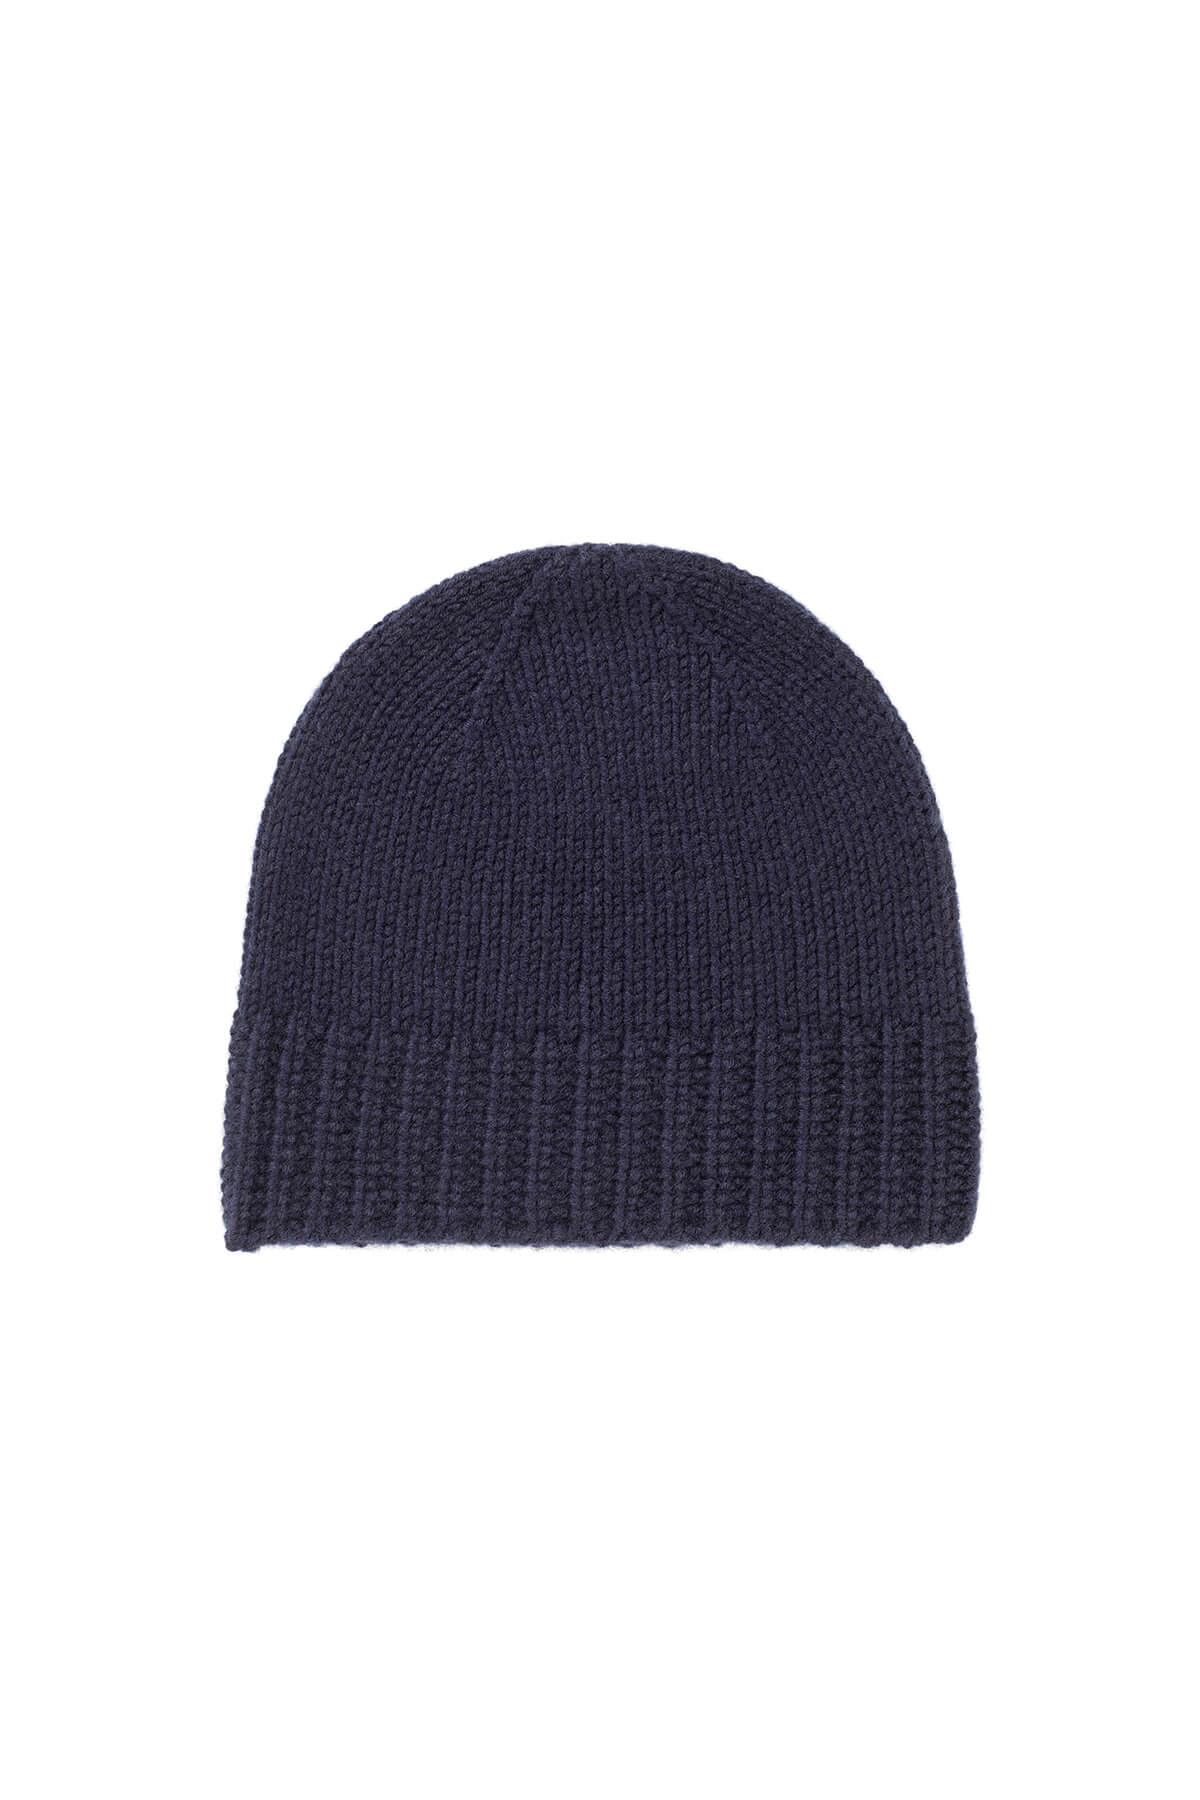 Johnstons of Elgin’s Navy Cashmere Chunky Rib Beanie on white background HAT03246SD070742